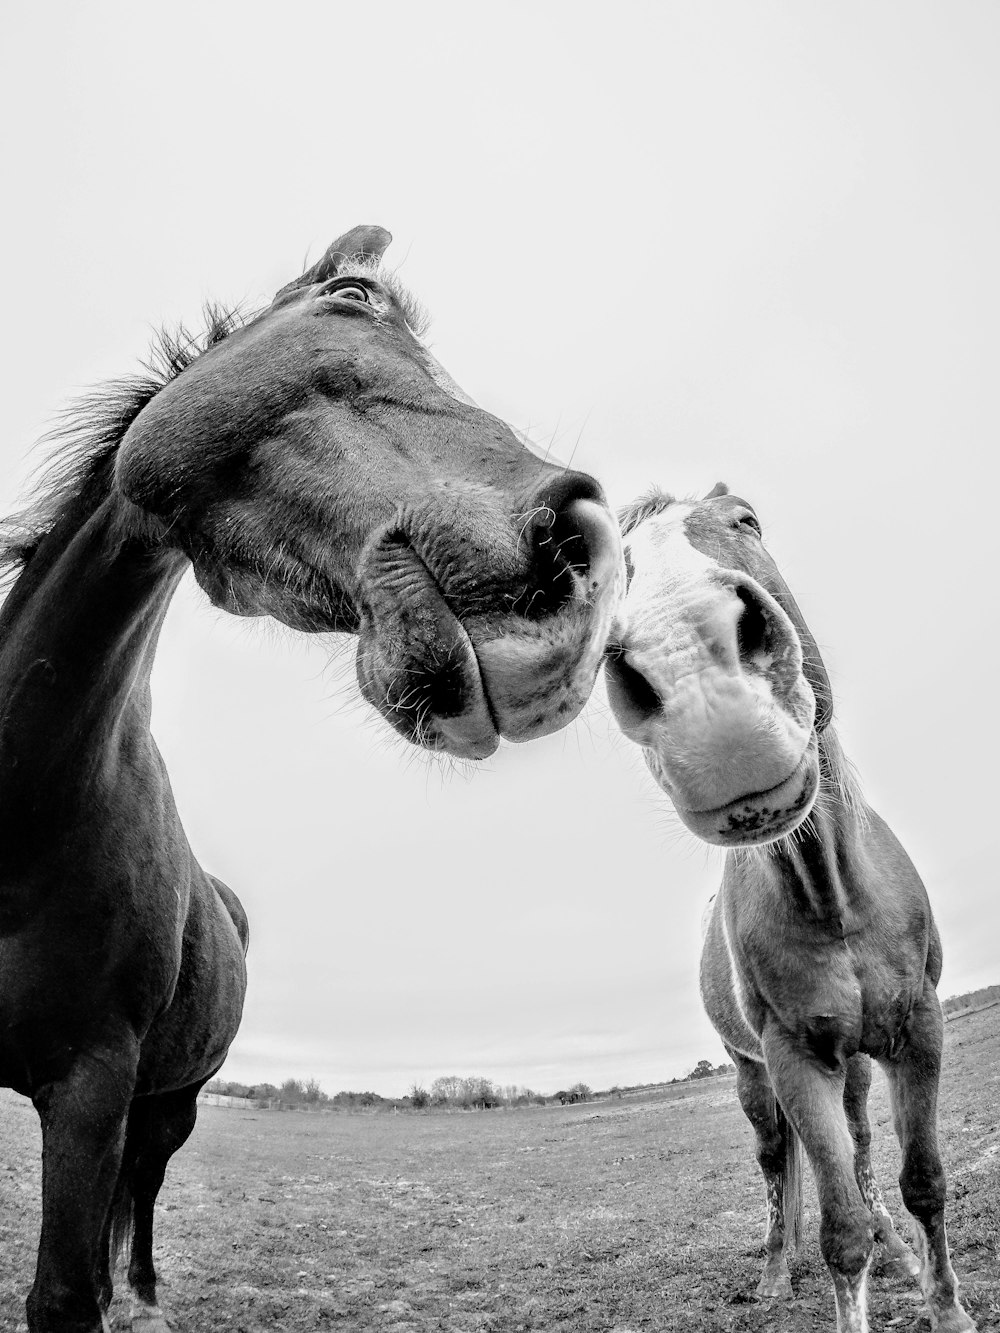 grayscale photo of 2 horses